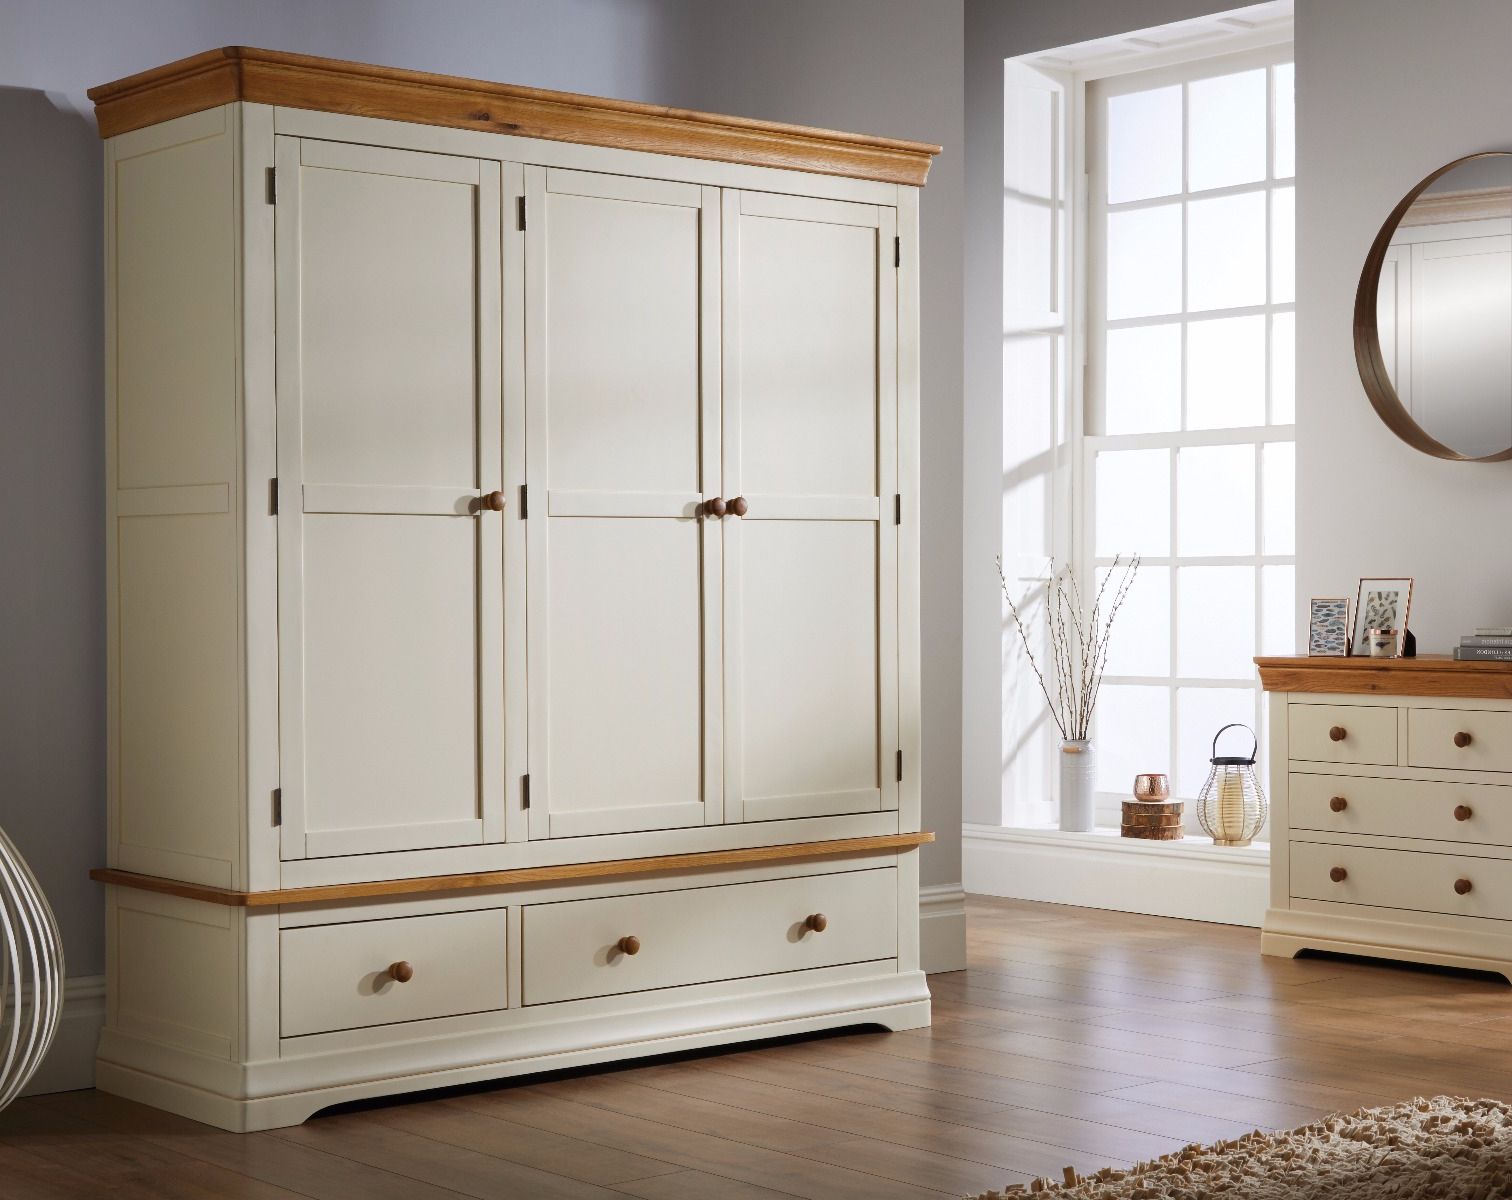 Farmhouse Cream Painted Triple Oak Wardrobe – Free Delivery | Top Furniture With Regard To Oak Wardrobes For Sale (View 12 of 20)